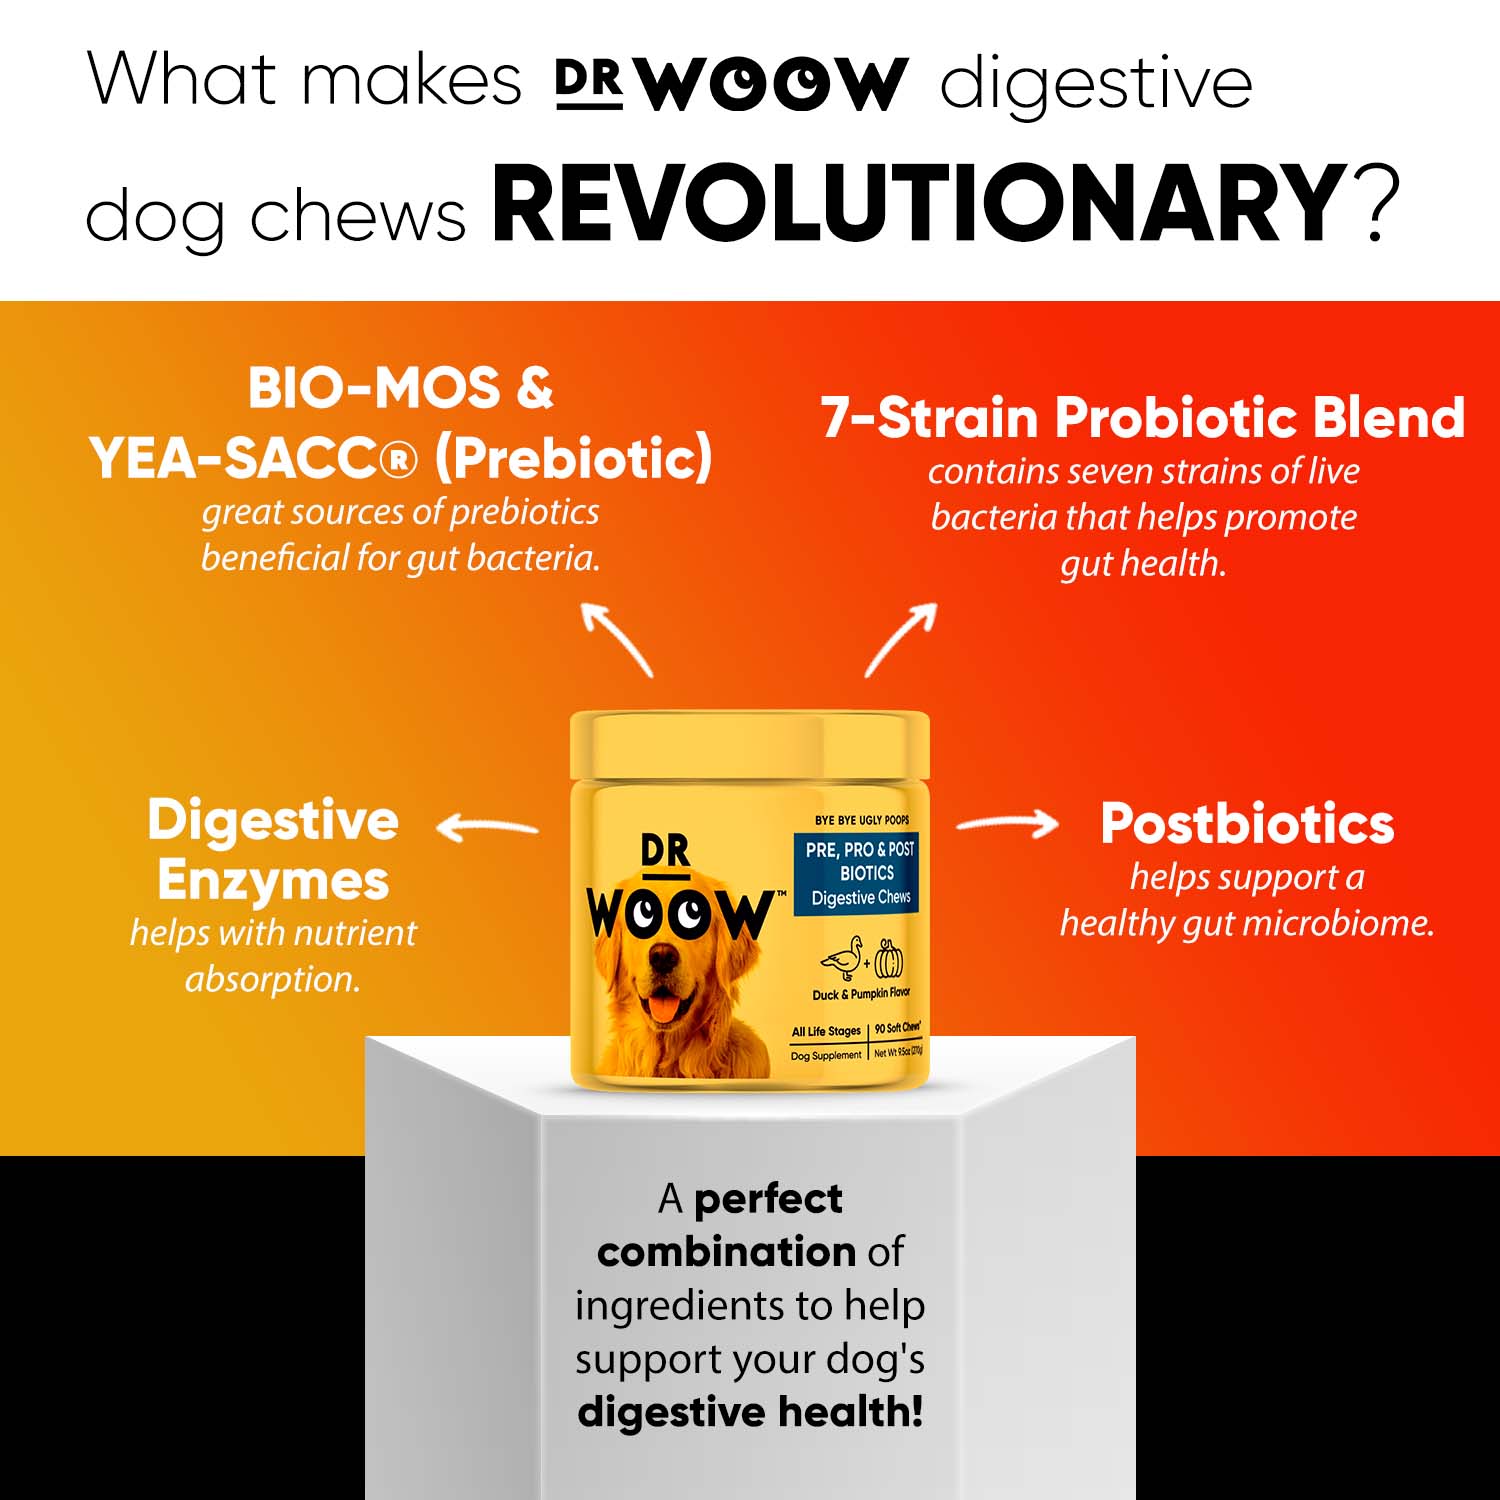 DR WOOW ALL NATURAL PREBIOTICS WILL BOOST YOUR DOGS DIGESTIVE HEALTH AND ALLOW FOR A BETTER IMMUNE SYSTEM